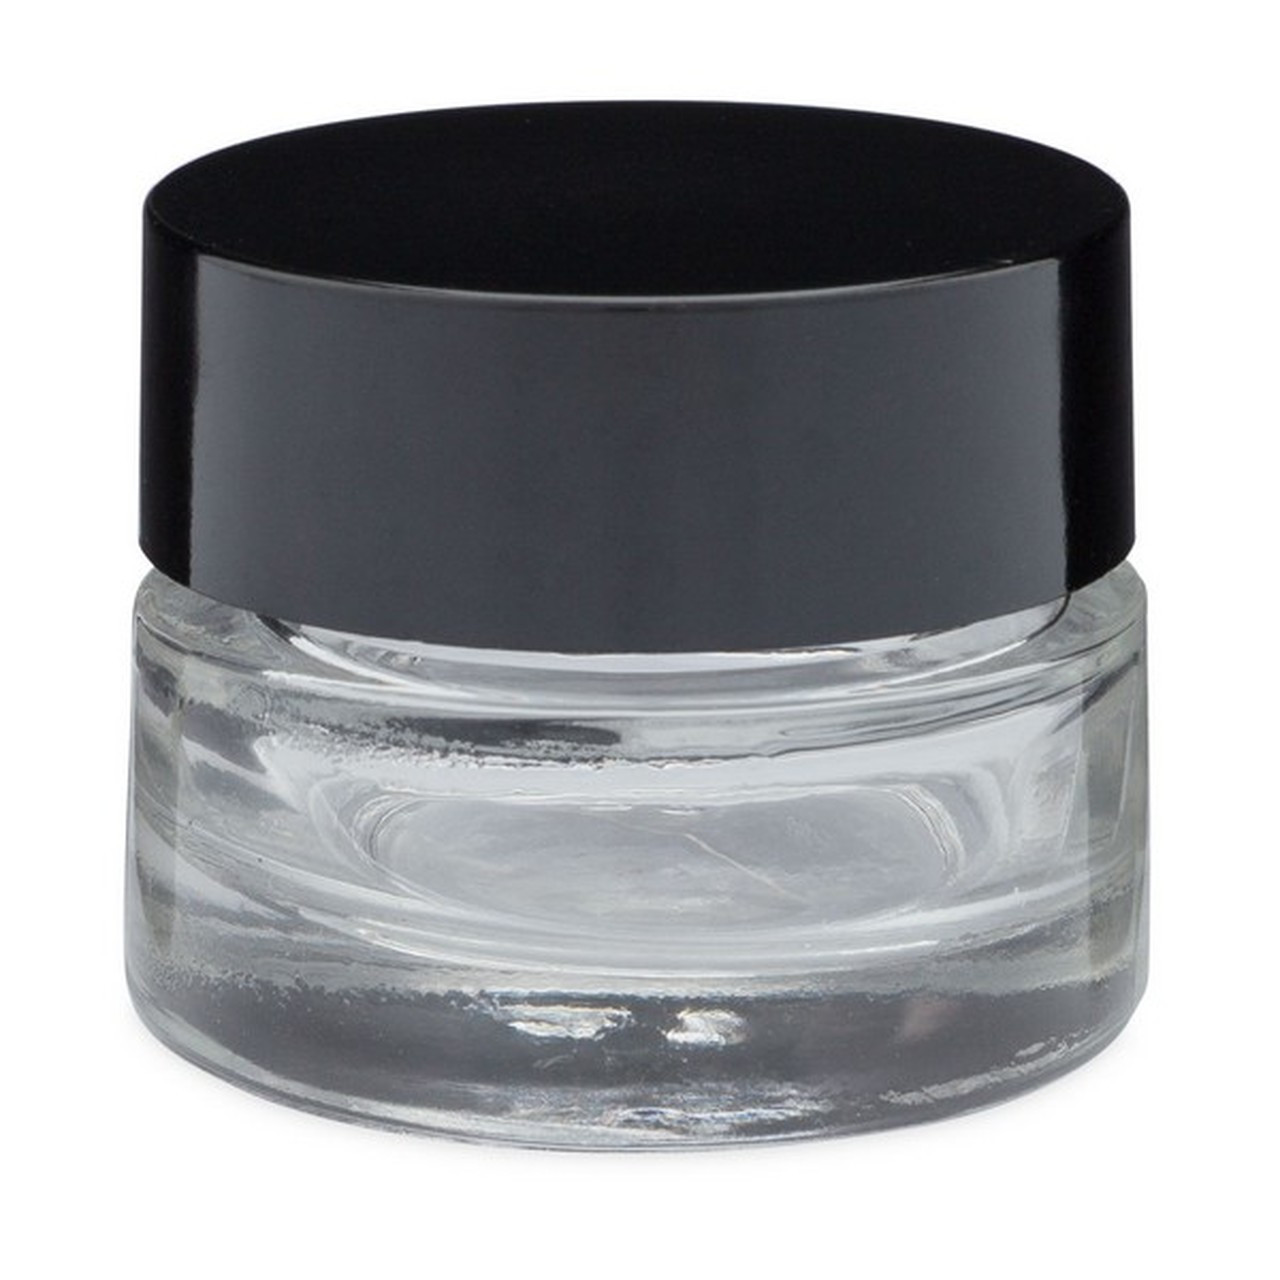 Huge selections of Glass JARS in stock and ready to ship! – PremiumVials